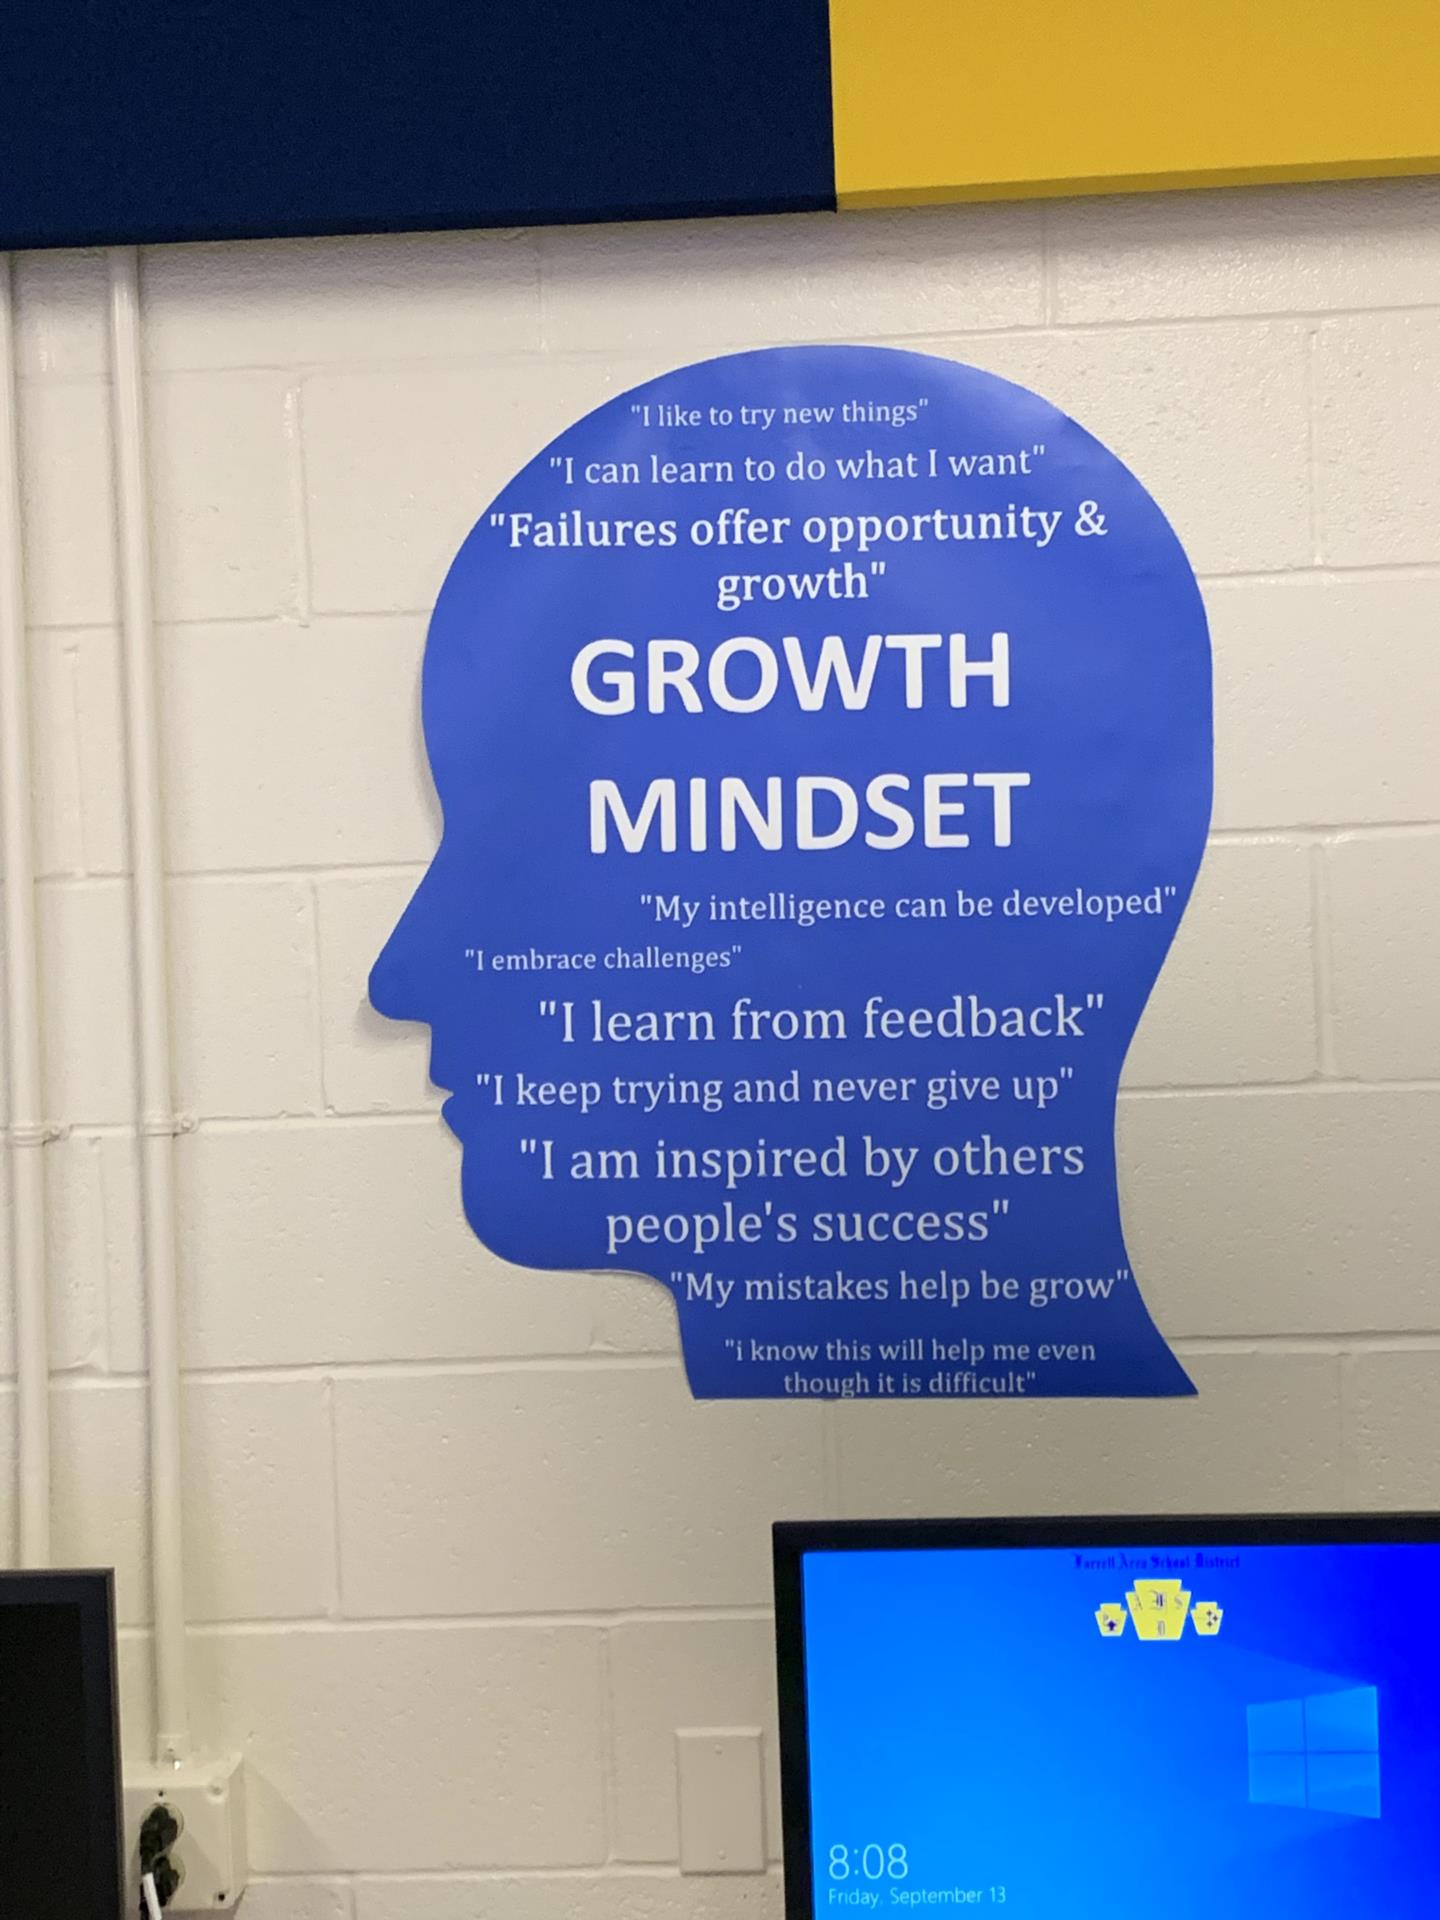 Growth mindset poster in the STEAM lab